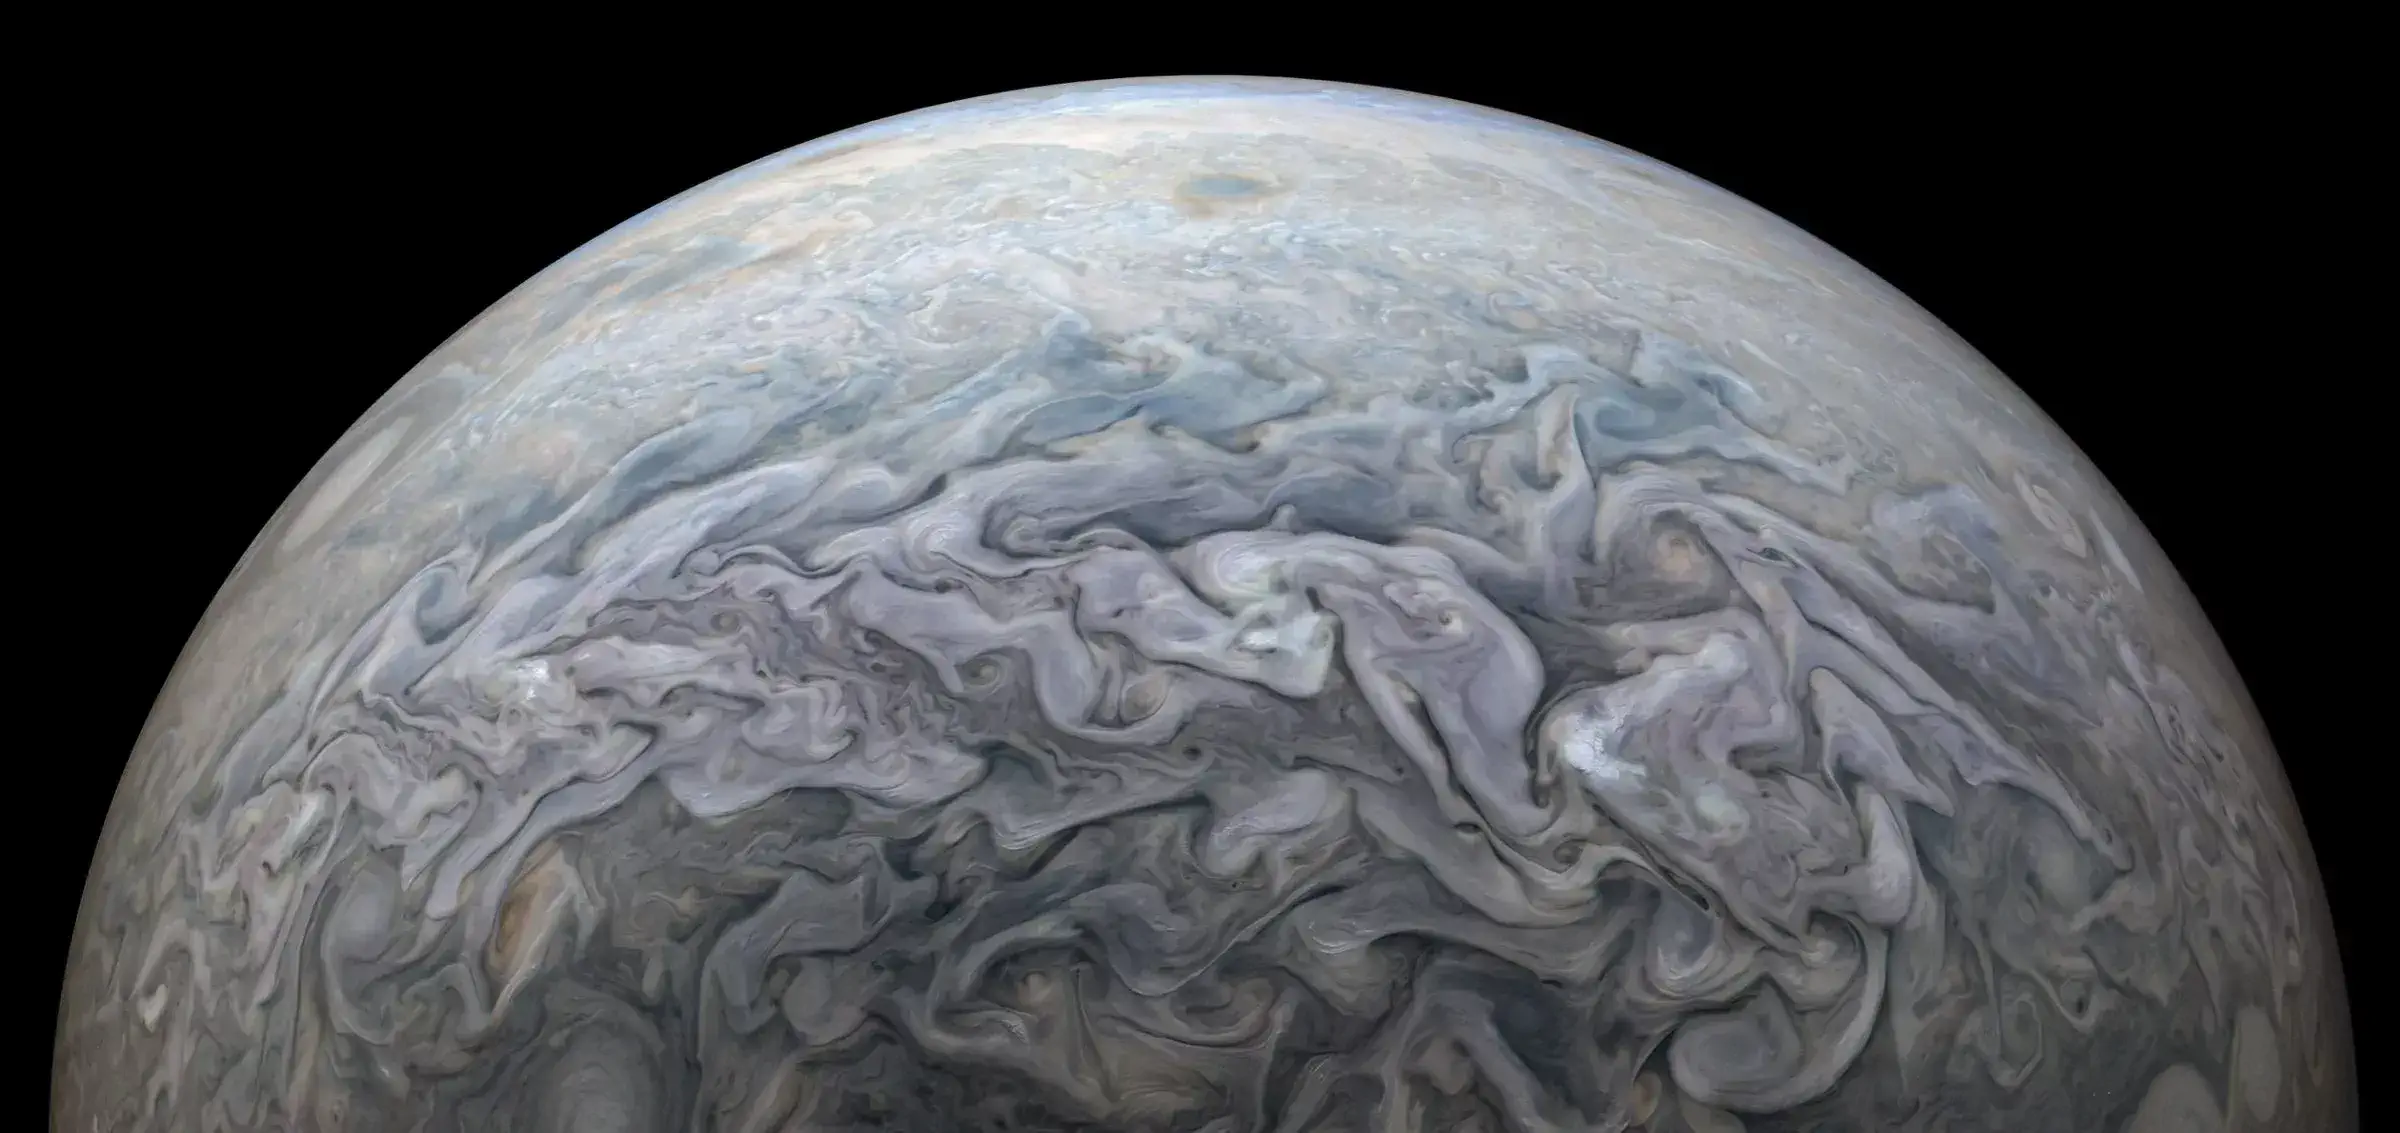 JUNO VIEW OF JUPITER, SEPTEMBER 2020 NASA’s Juno spacecraft captured this view of Jupiter’s swirling clouds during its 29th close pass over the giant planet in September 2020. NASA/JPL-Caltech/SwRI/MSSS/Kevin M. Gill